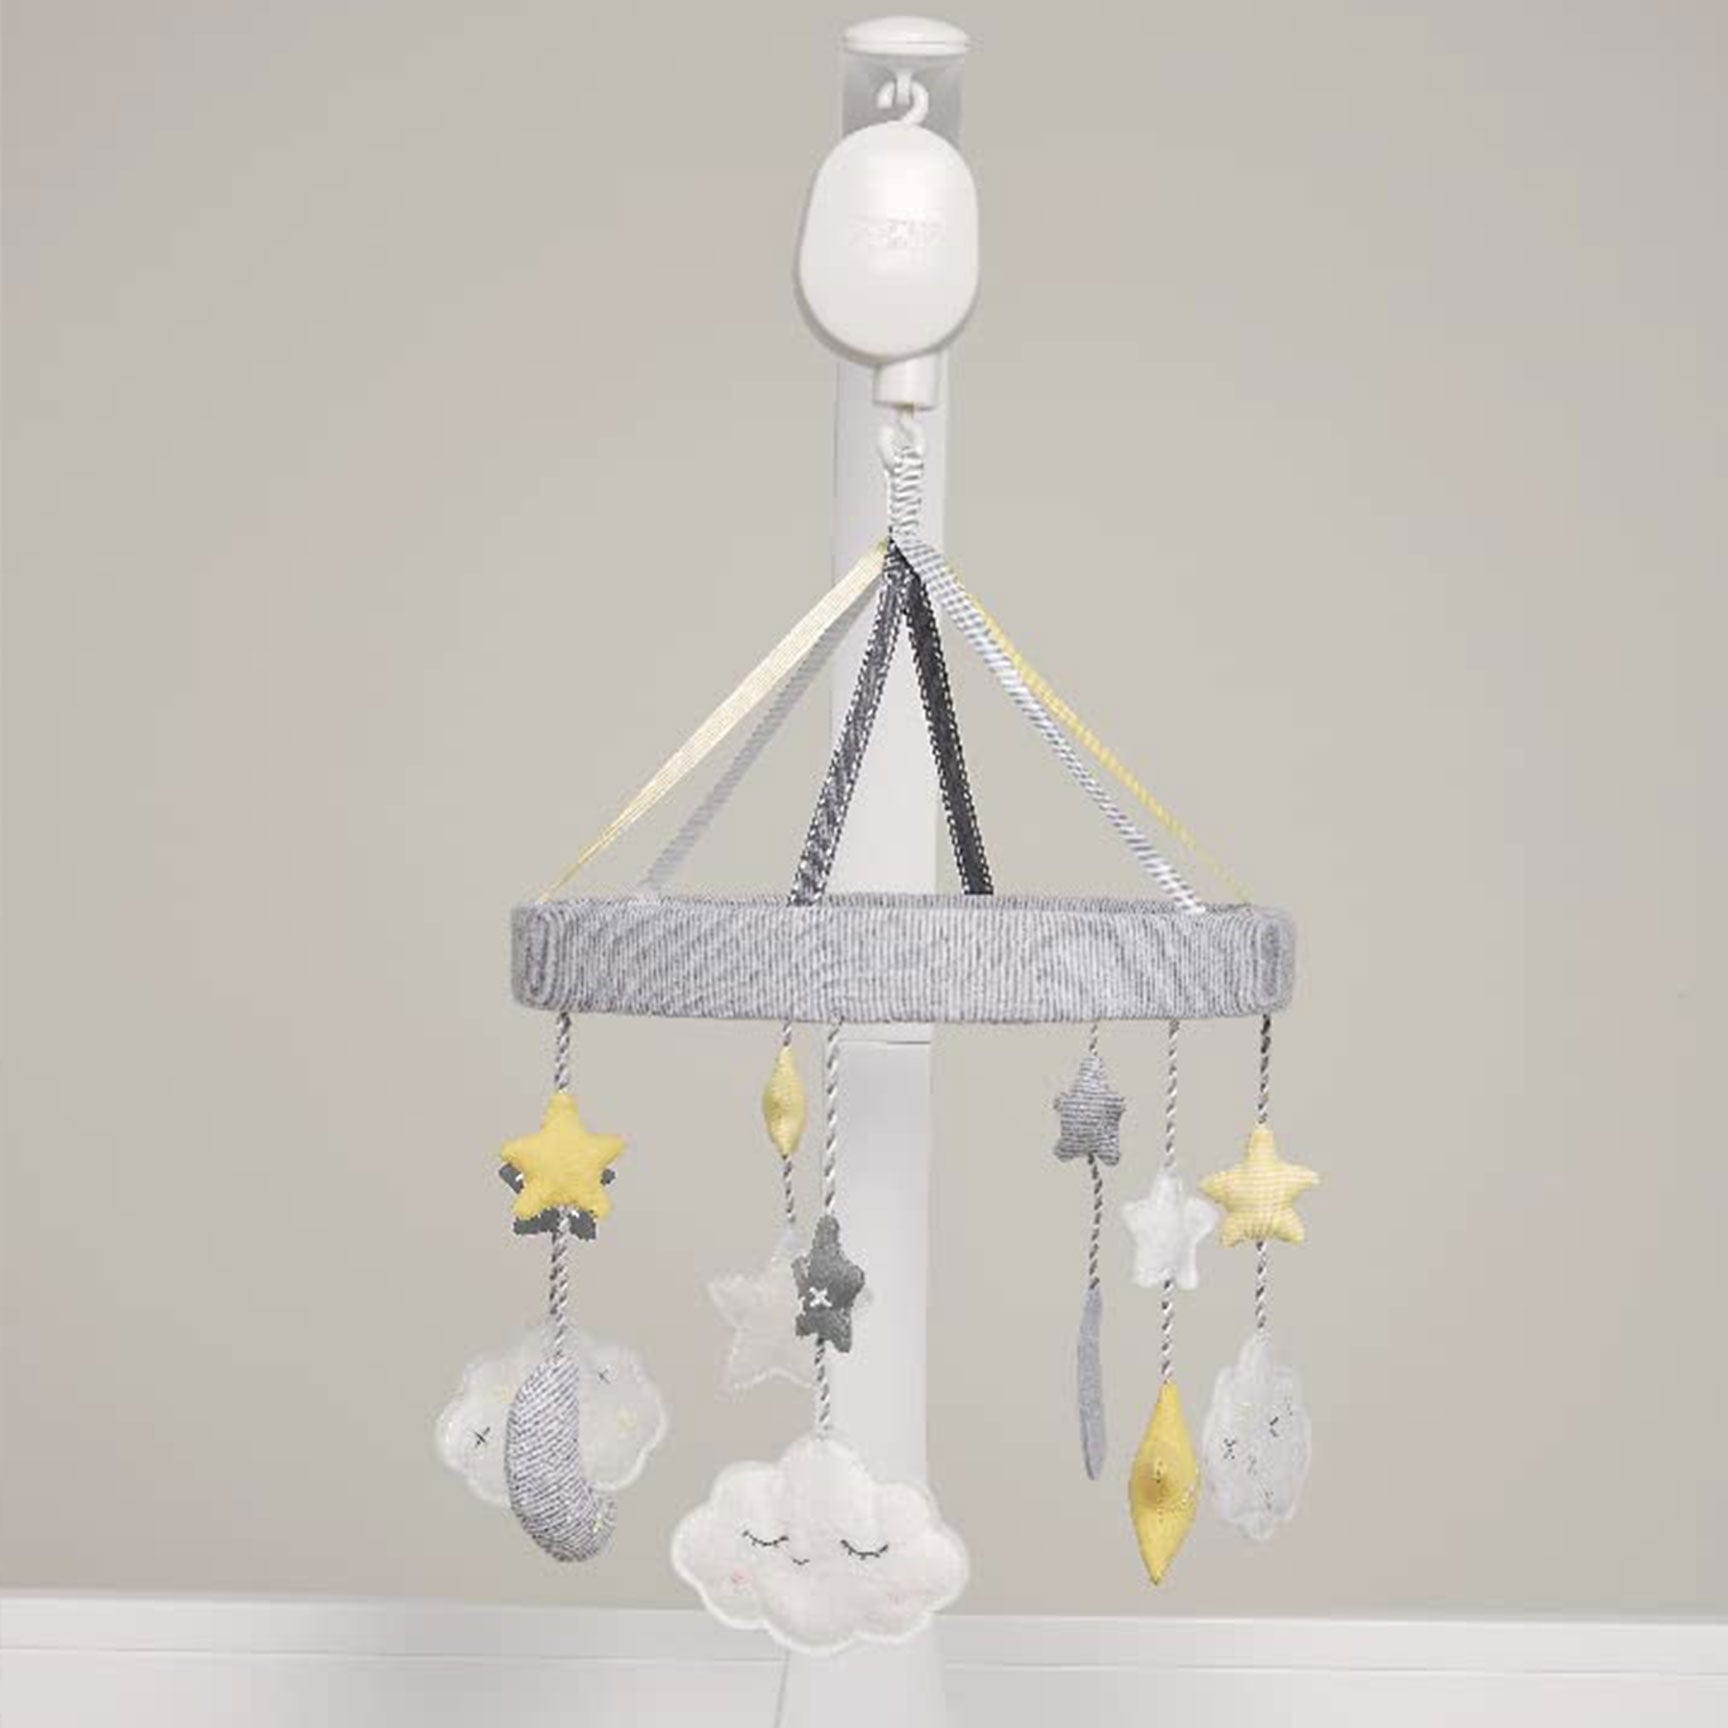 Mamas & Papas Welcome to the World Cot Musical Mobile in Cloud Musical Mobiles